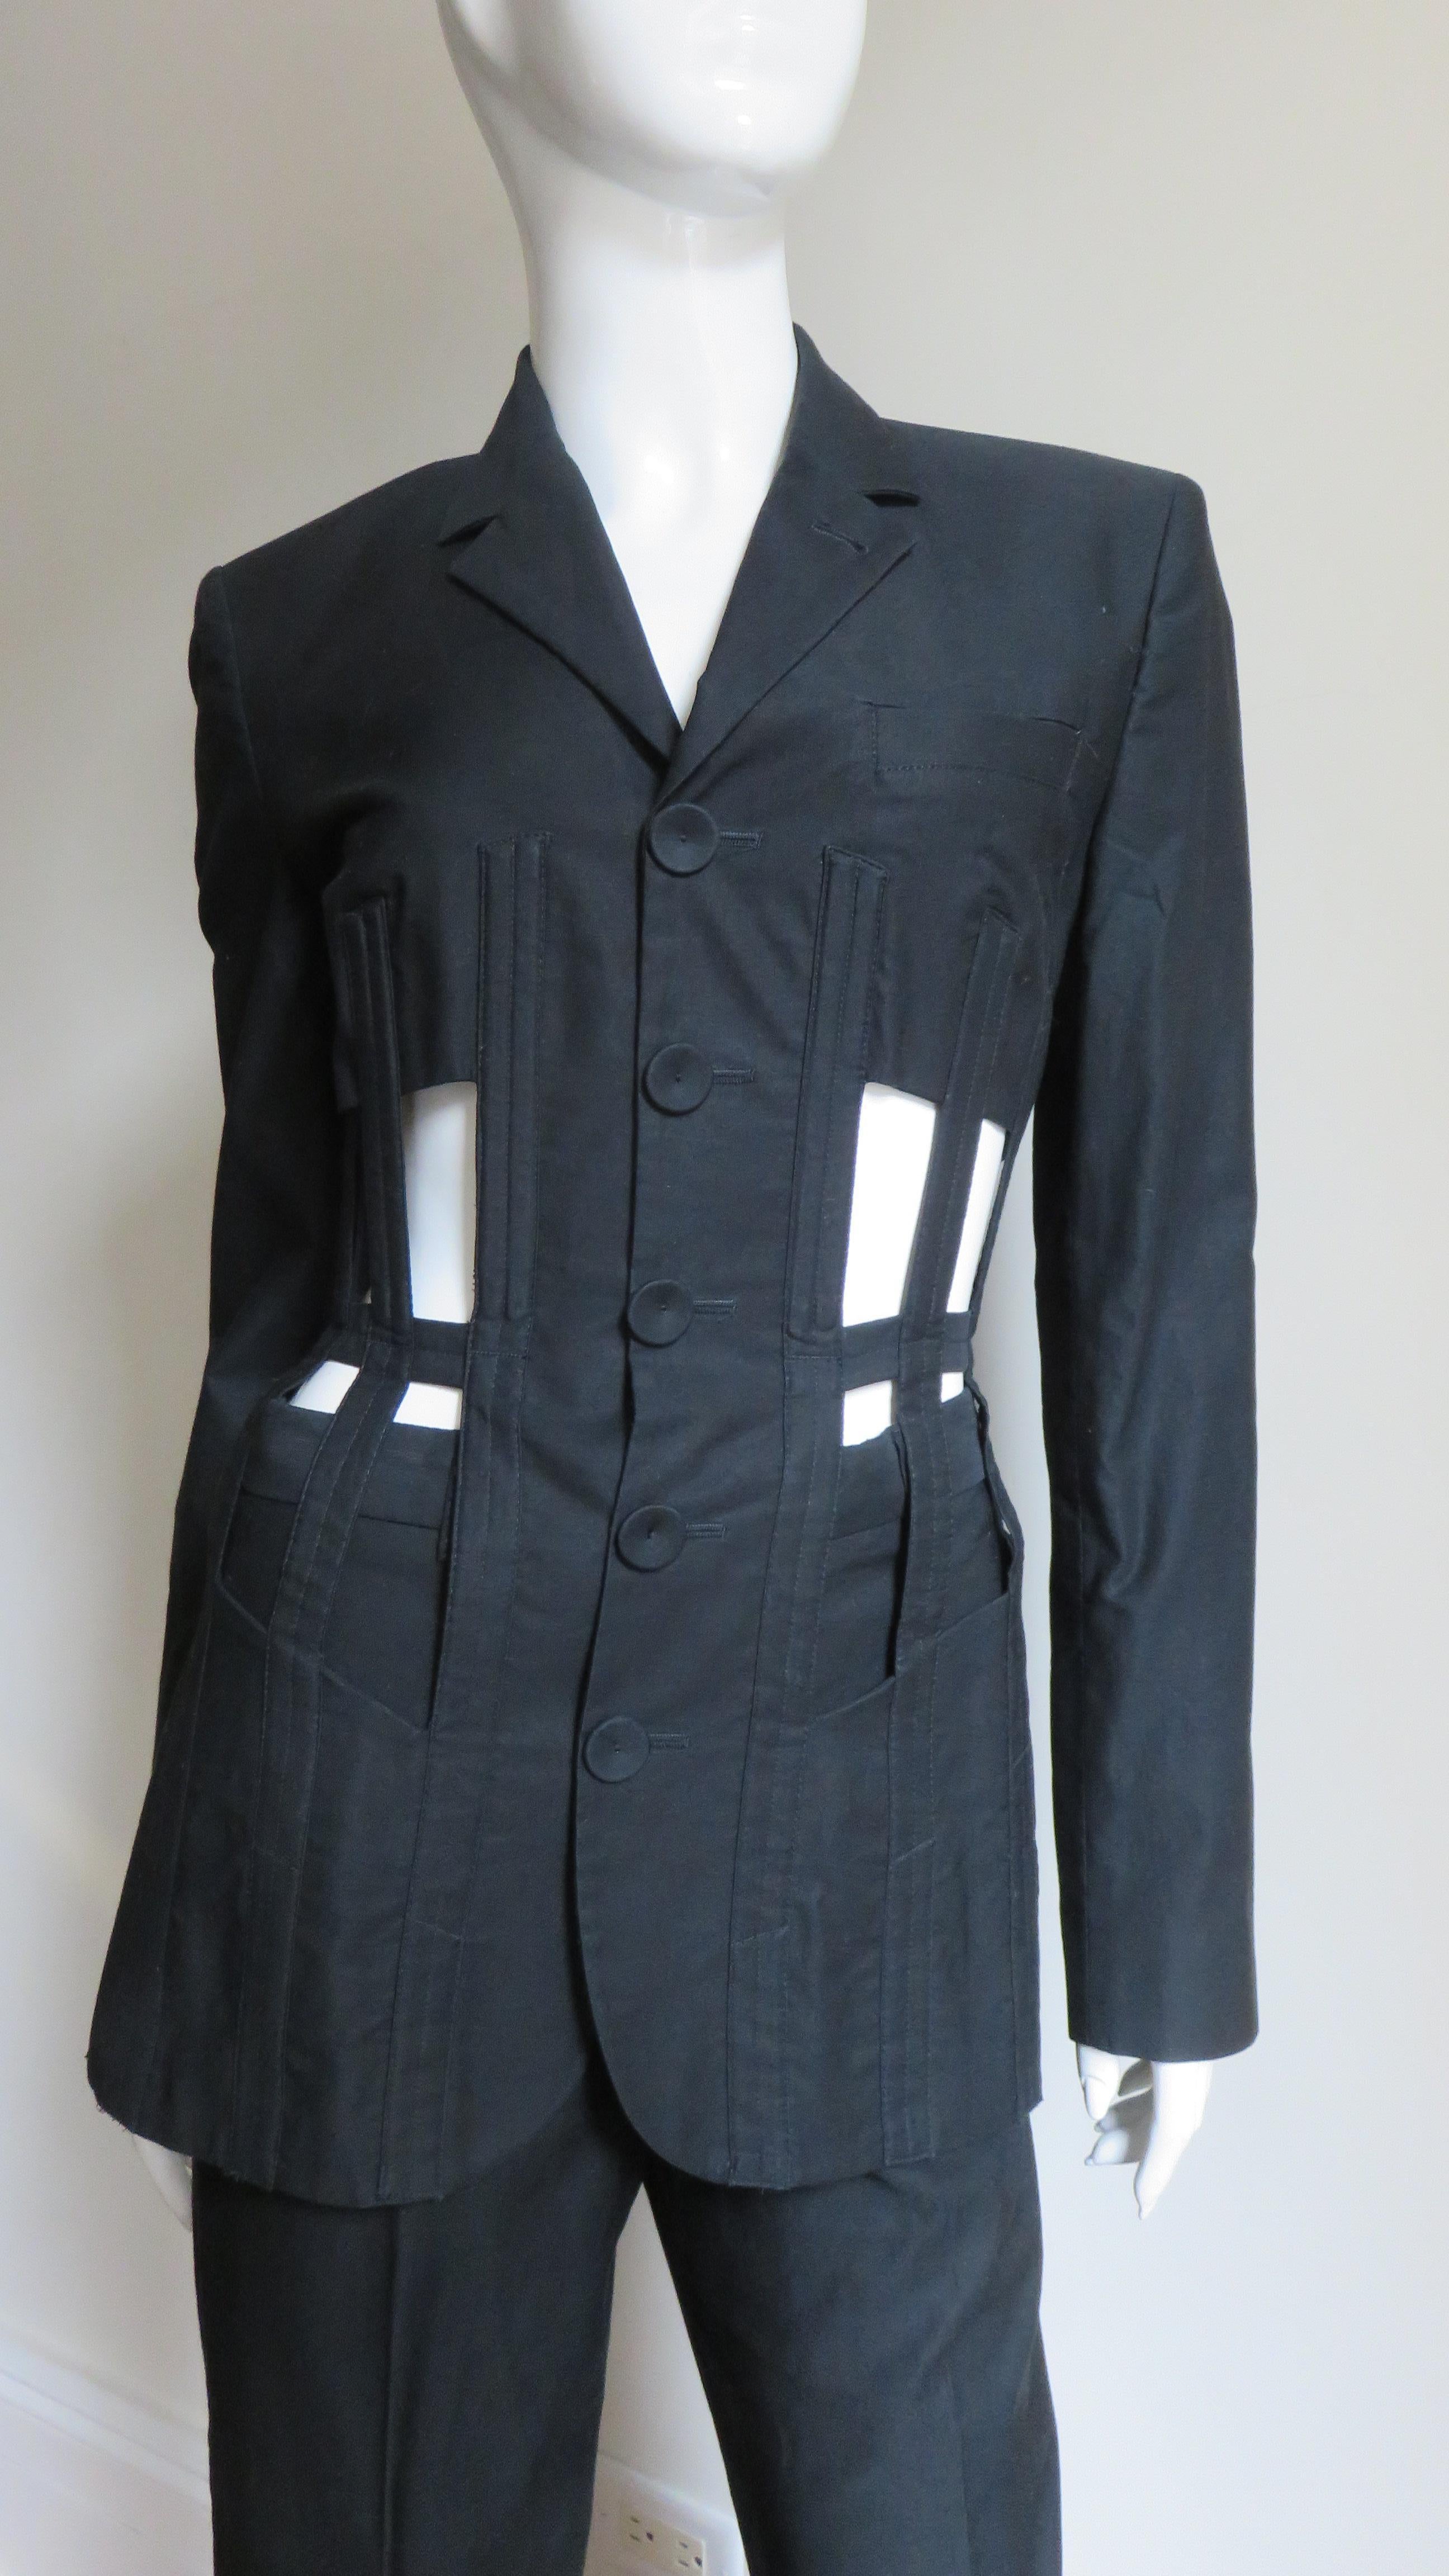 Jean Paul Gaultier Iconic Cage Corset lace up Jacket Pant Suit S/S 1989 In Good Condition For Sale In Water Mill, NY